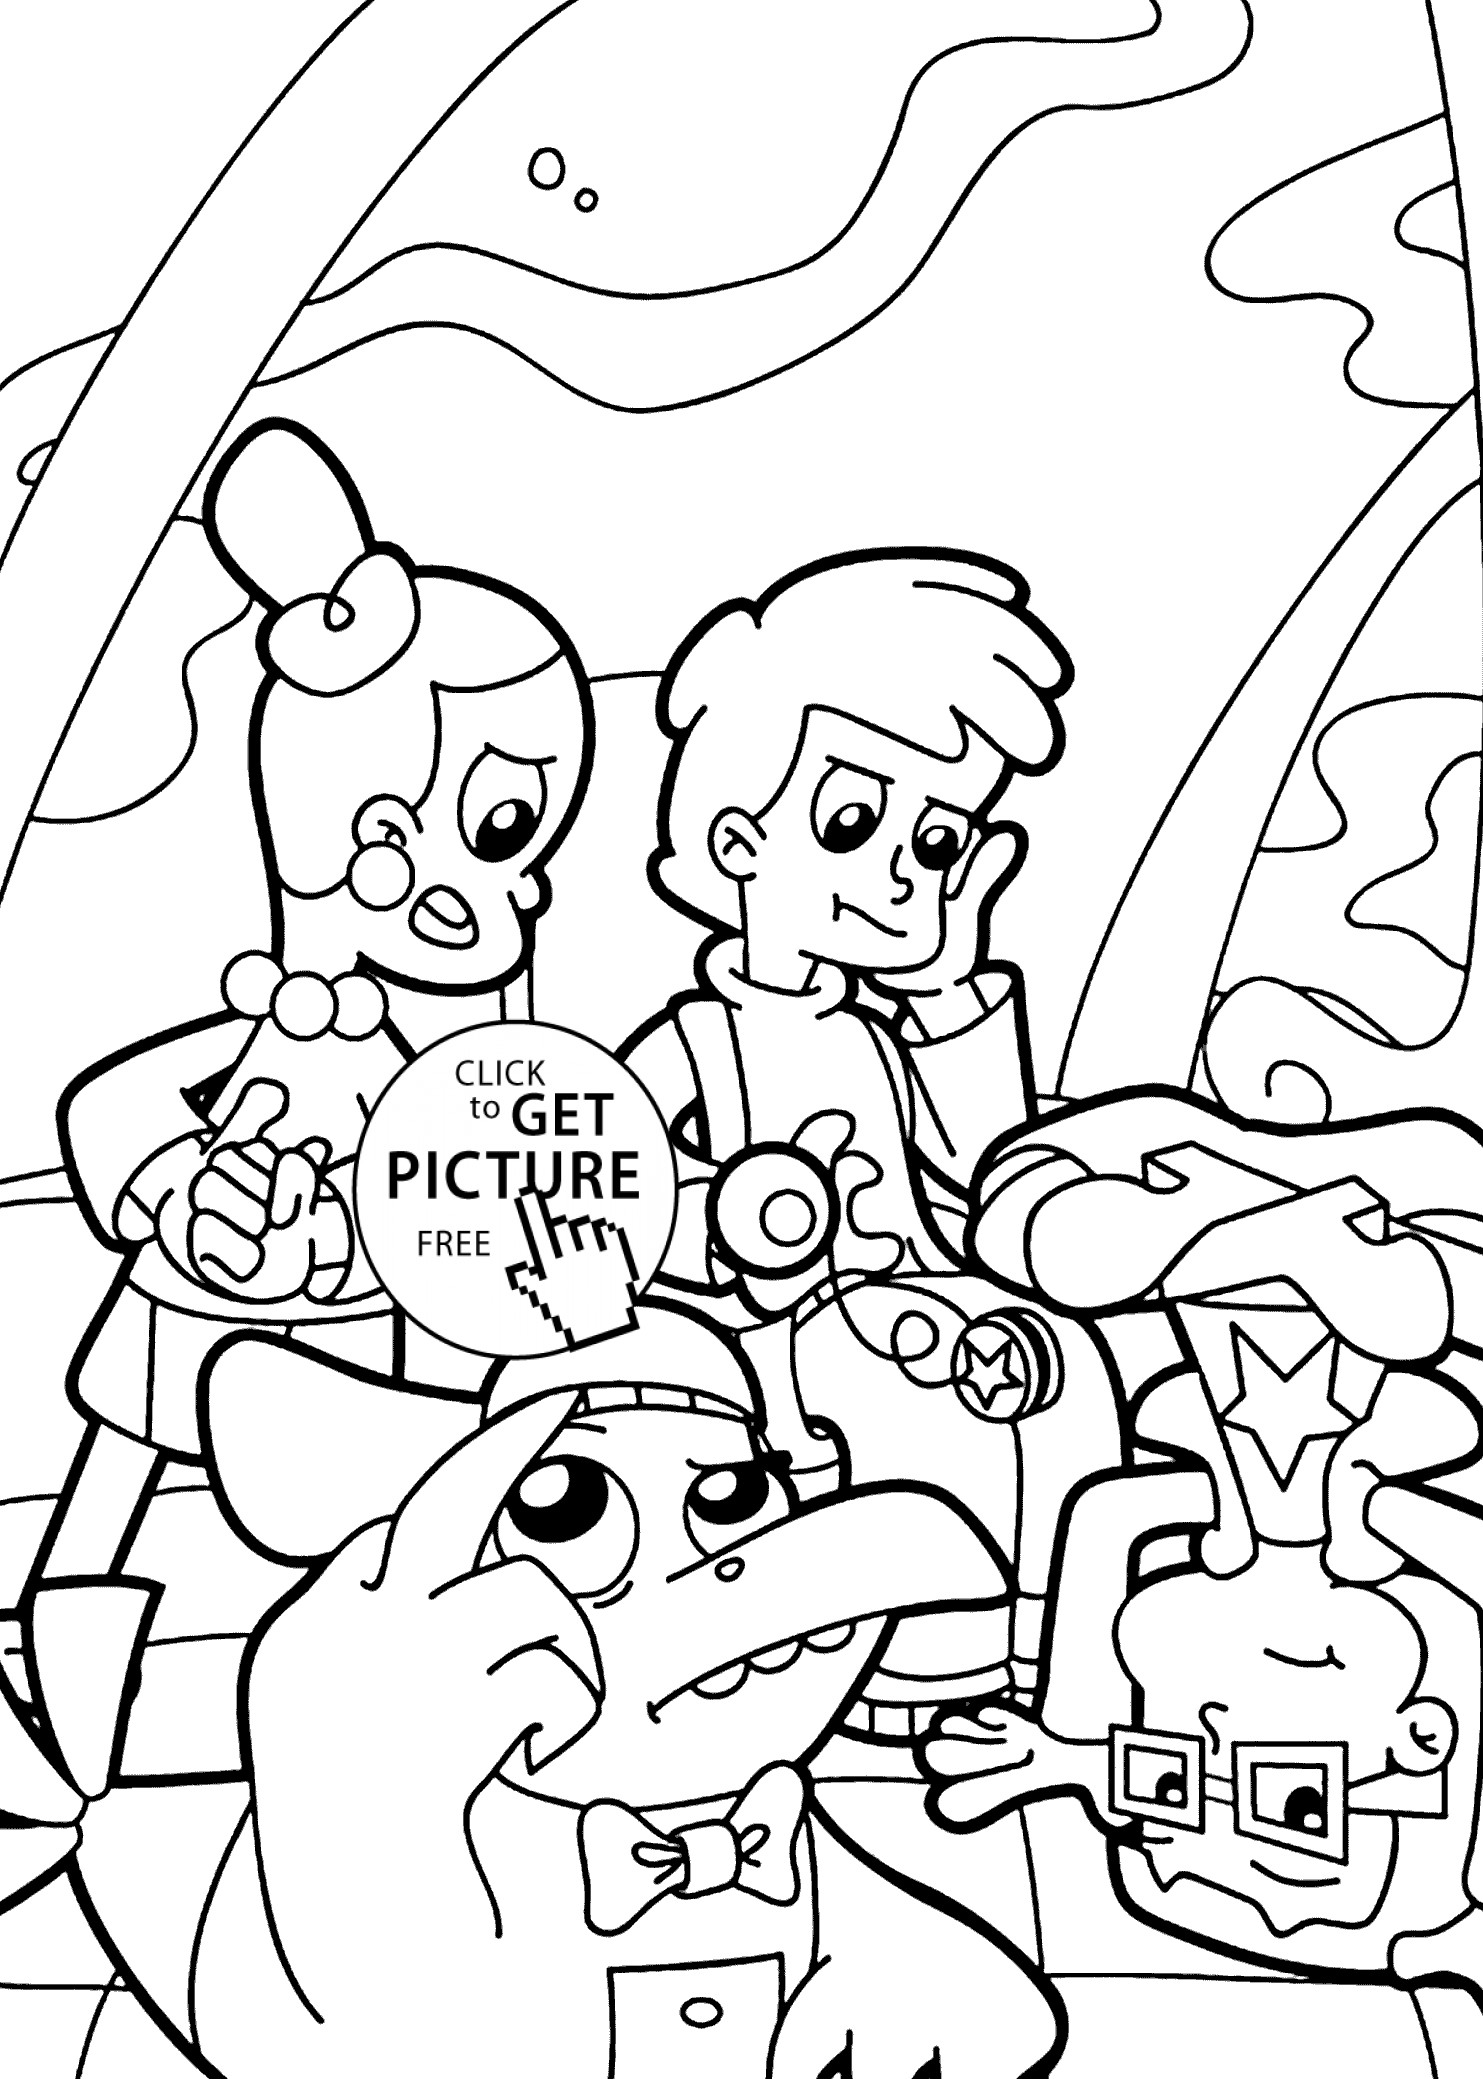 Coloring Books For Children
 Cyberchase coloring pages for kids printable free